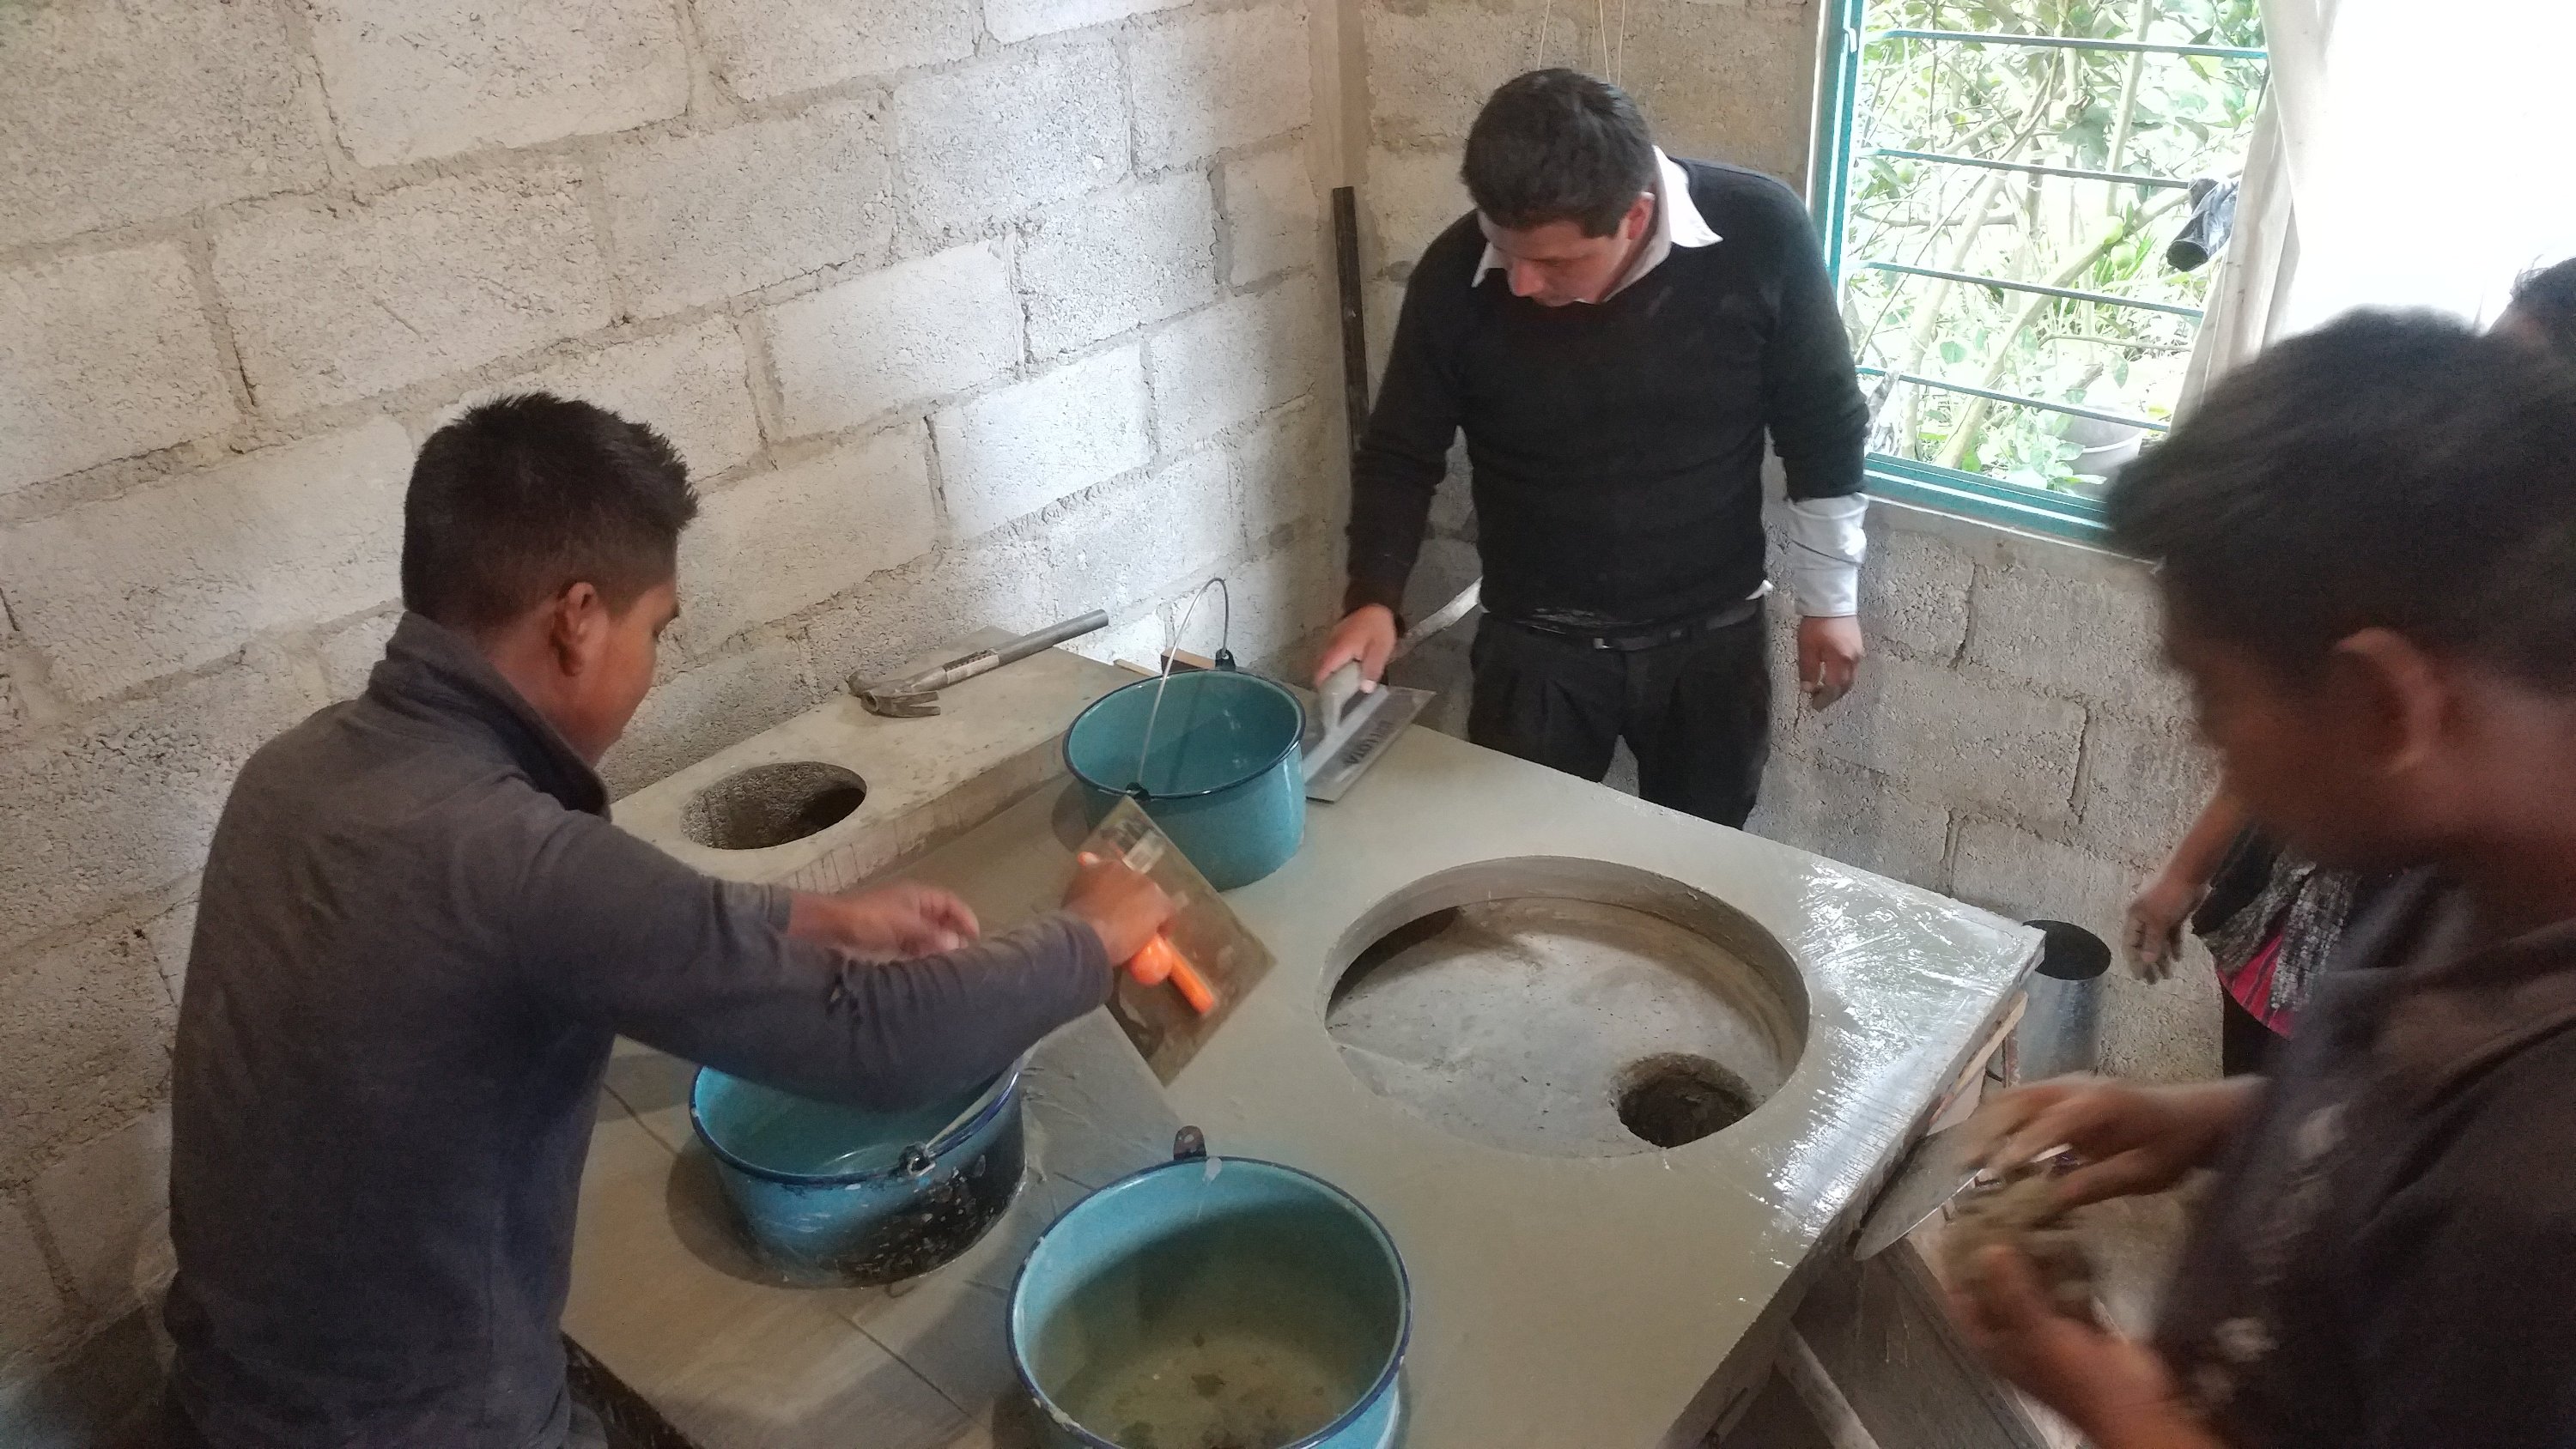 More Training, stoves & molds